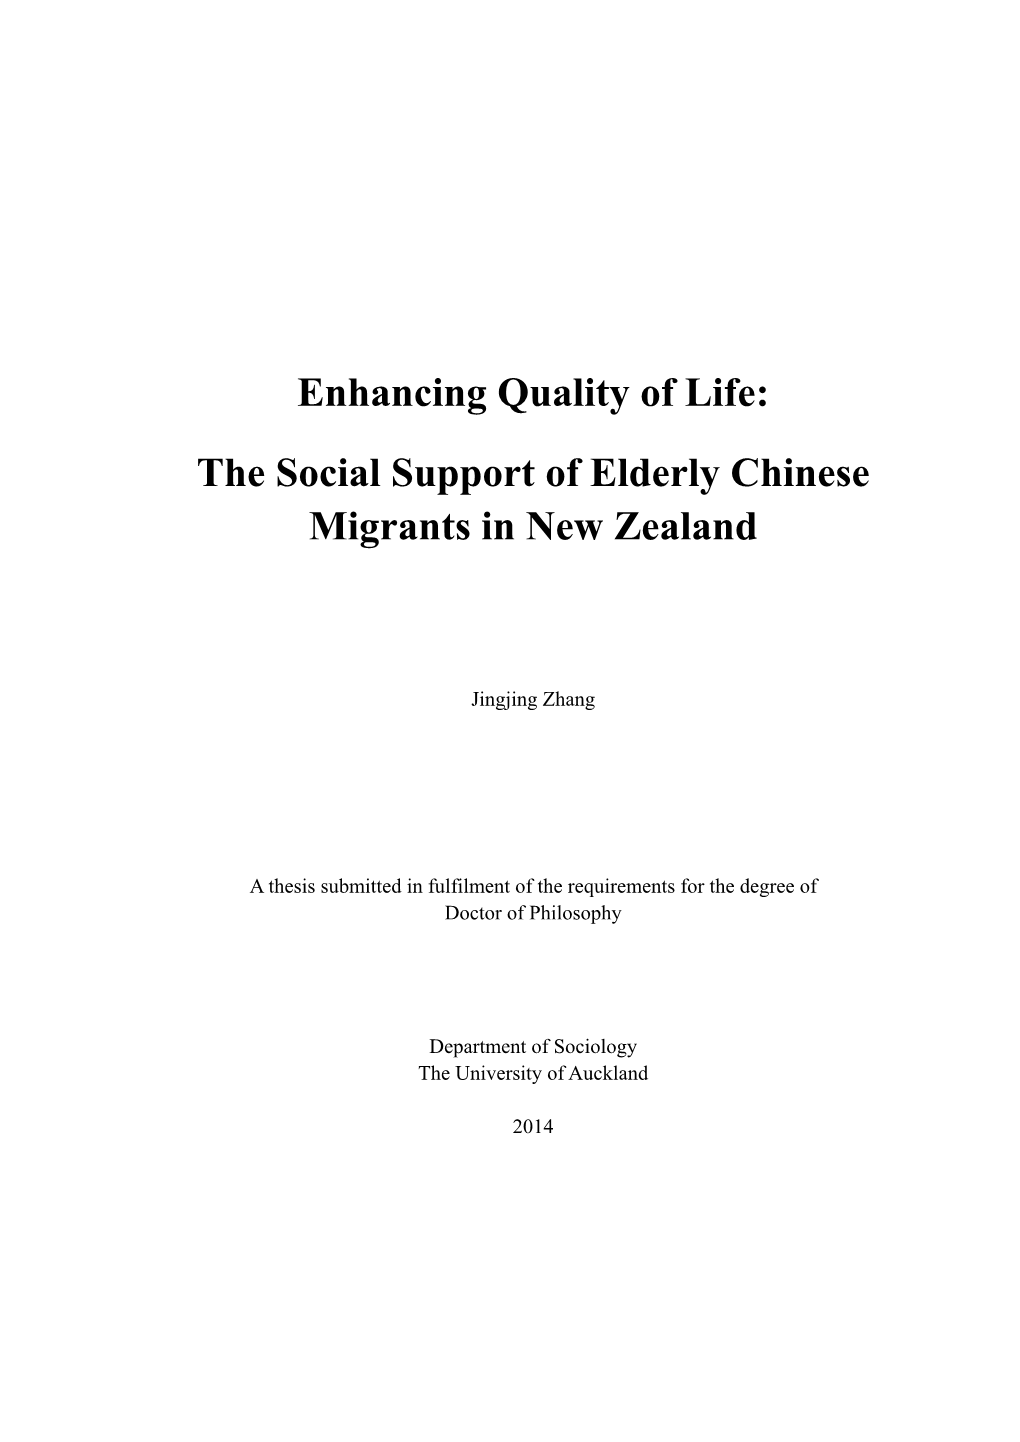 The Social Support of Elderly Chinese Migrants in New Zealand